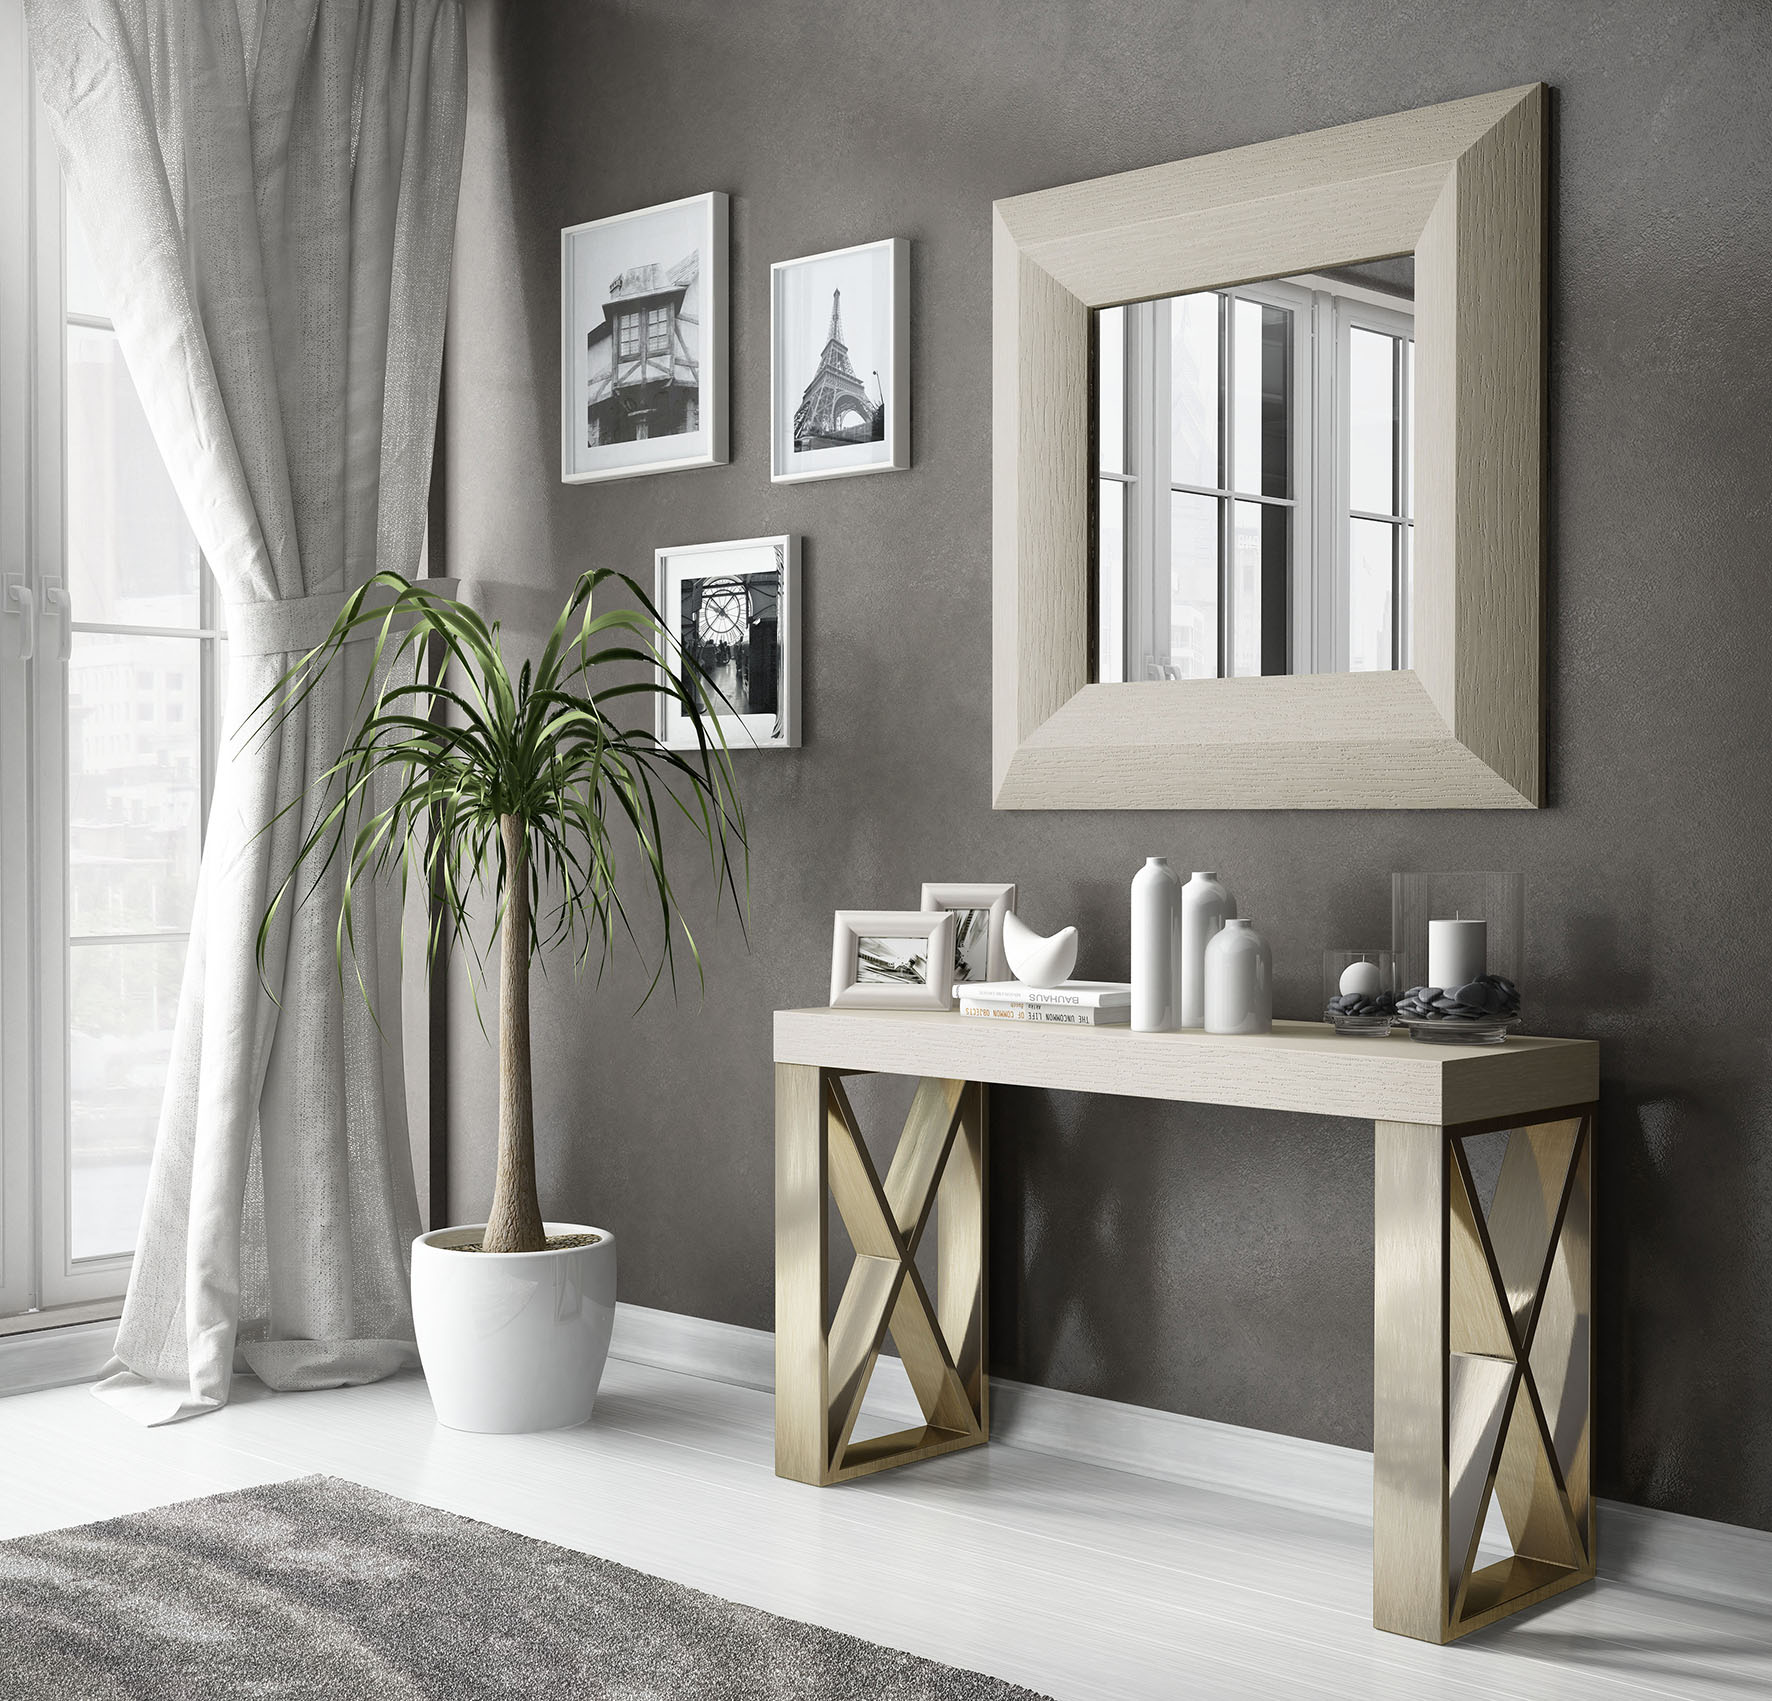 Brands Franco ENZO Dining and Wall Units, Spain CII.40 Console Table